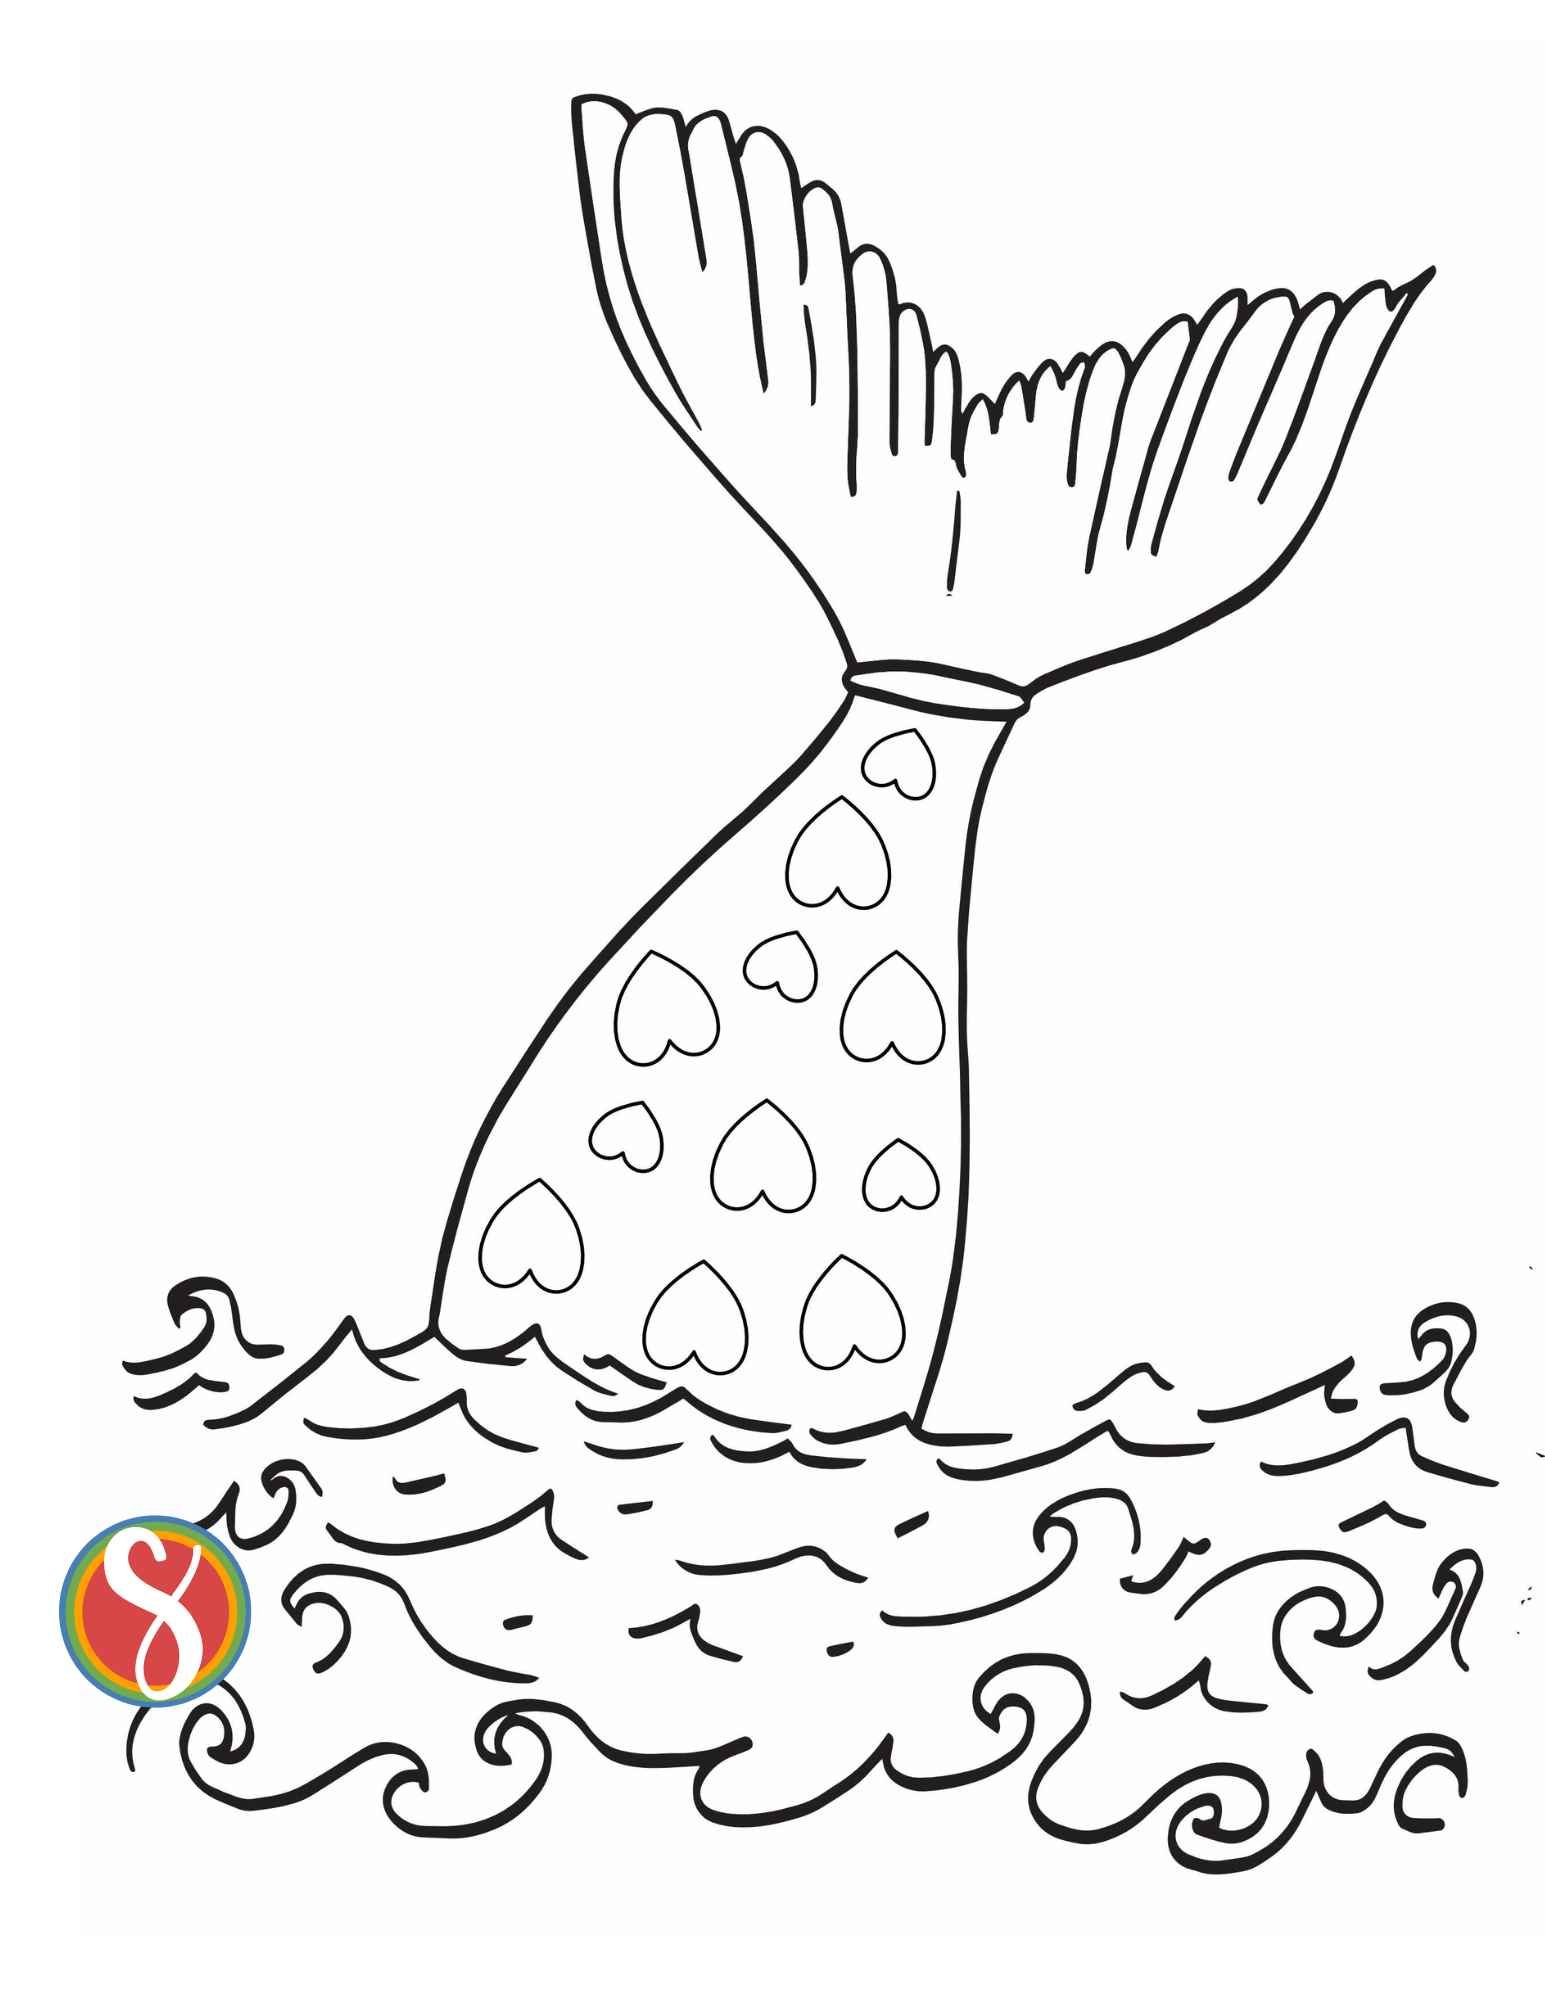 A large mermaid tail coming out of little waves. The tail is full of little colorable hearts